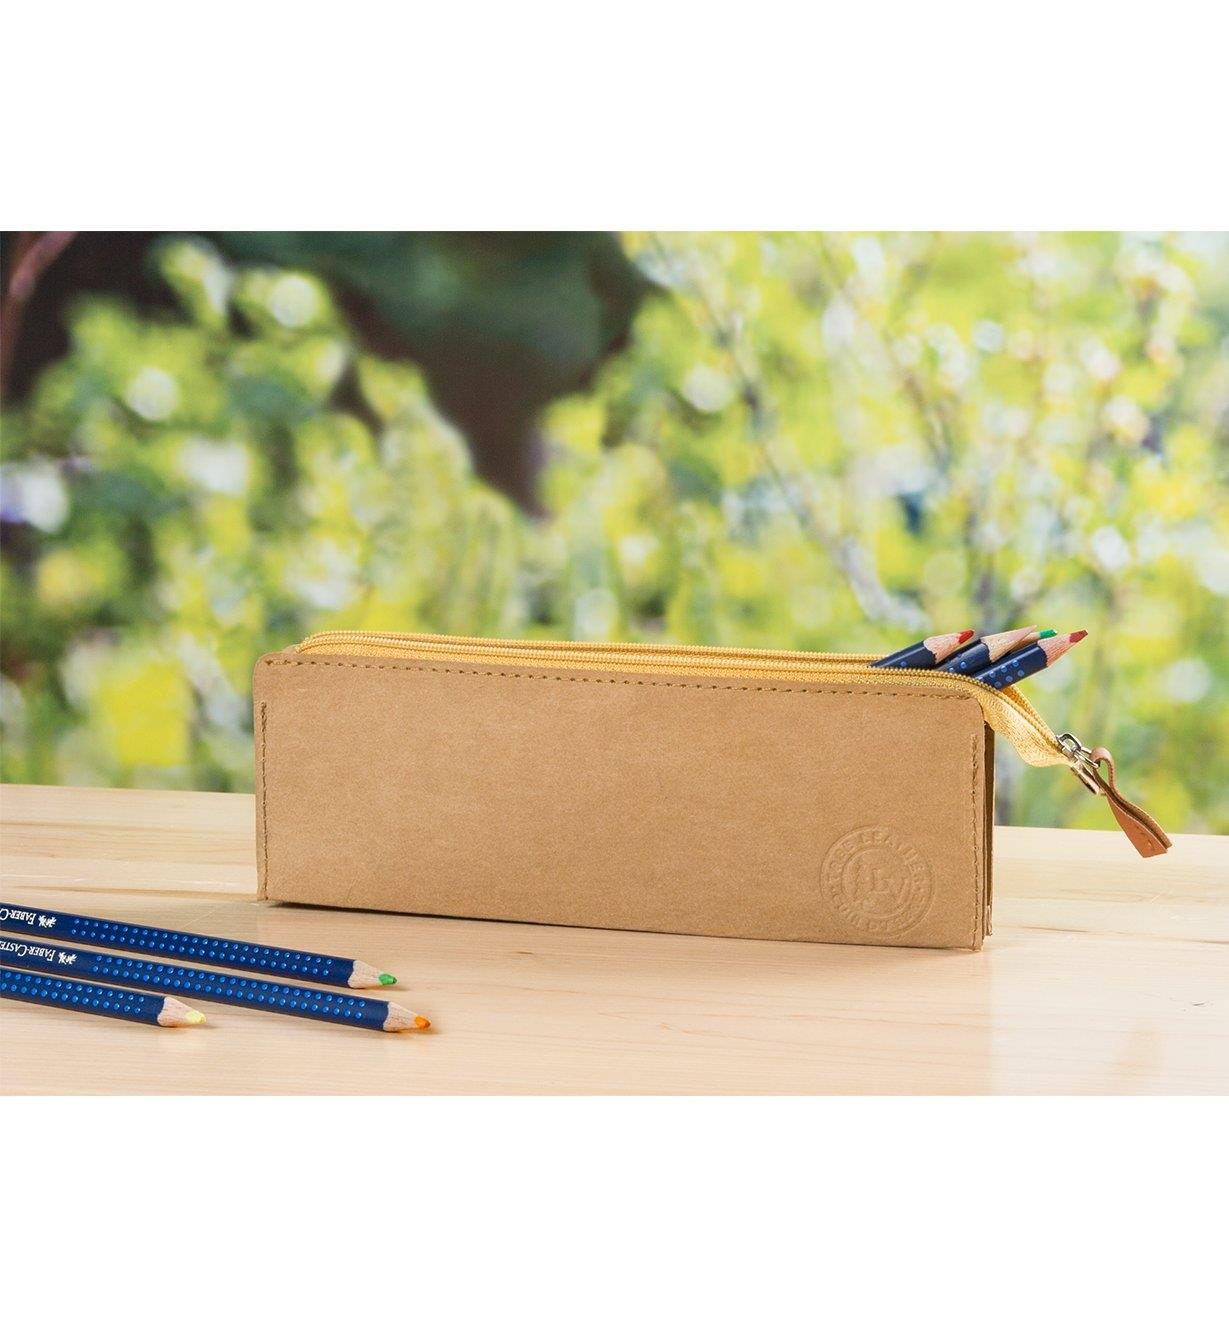 Tree Leather Zippered Pouch on a desk holding colored pencils